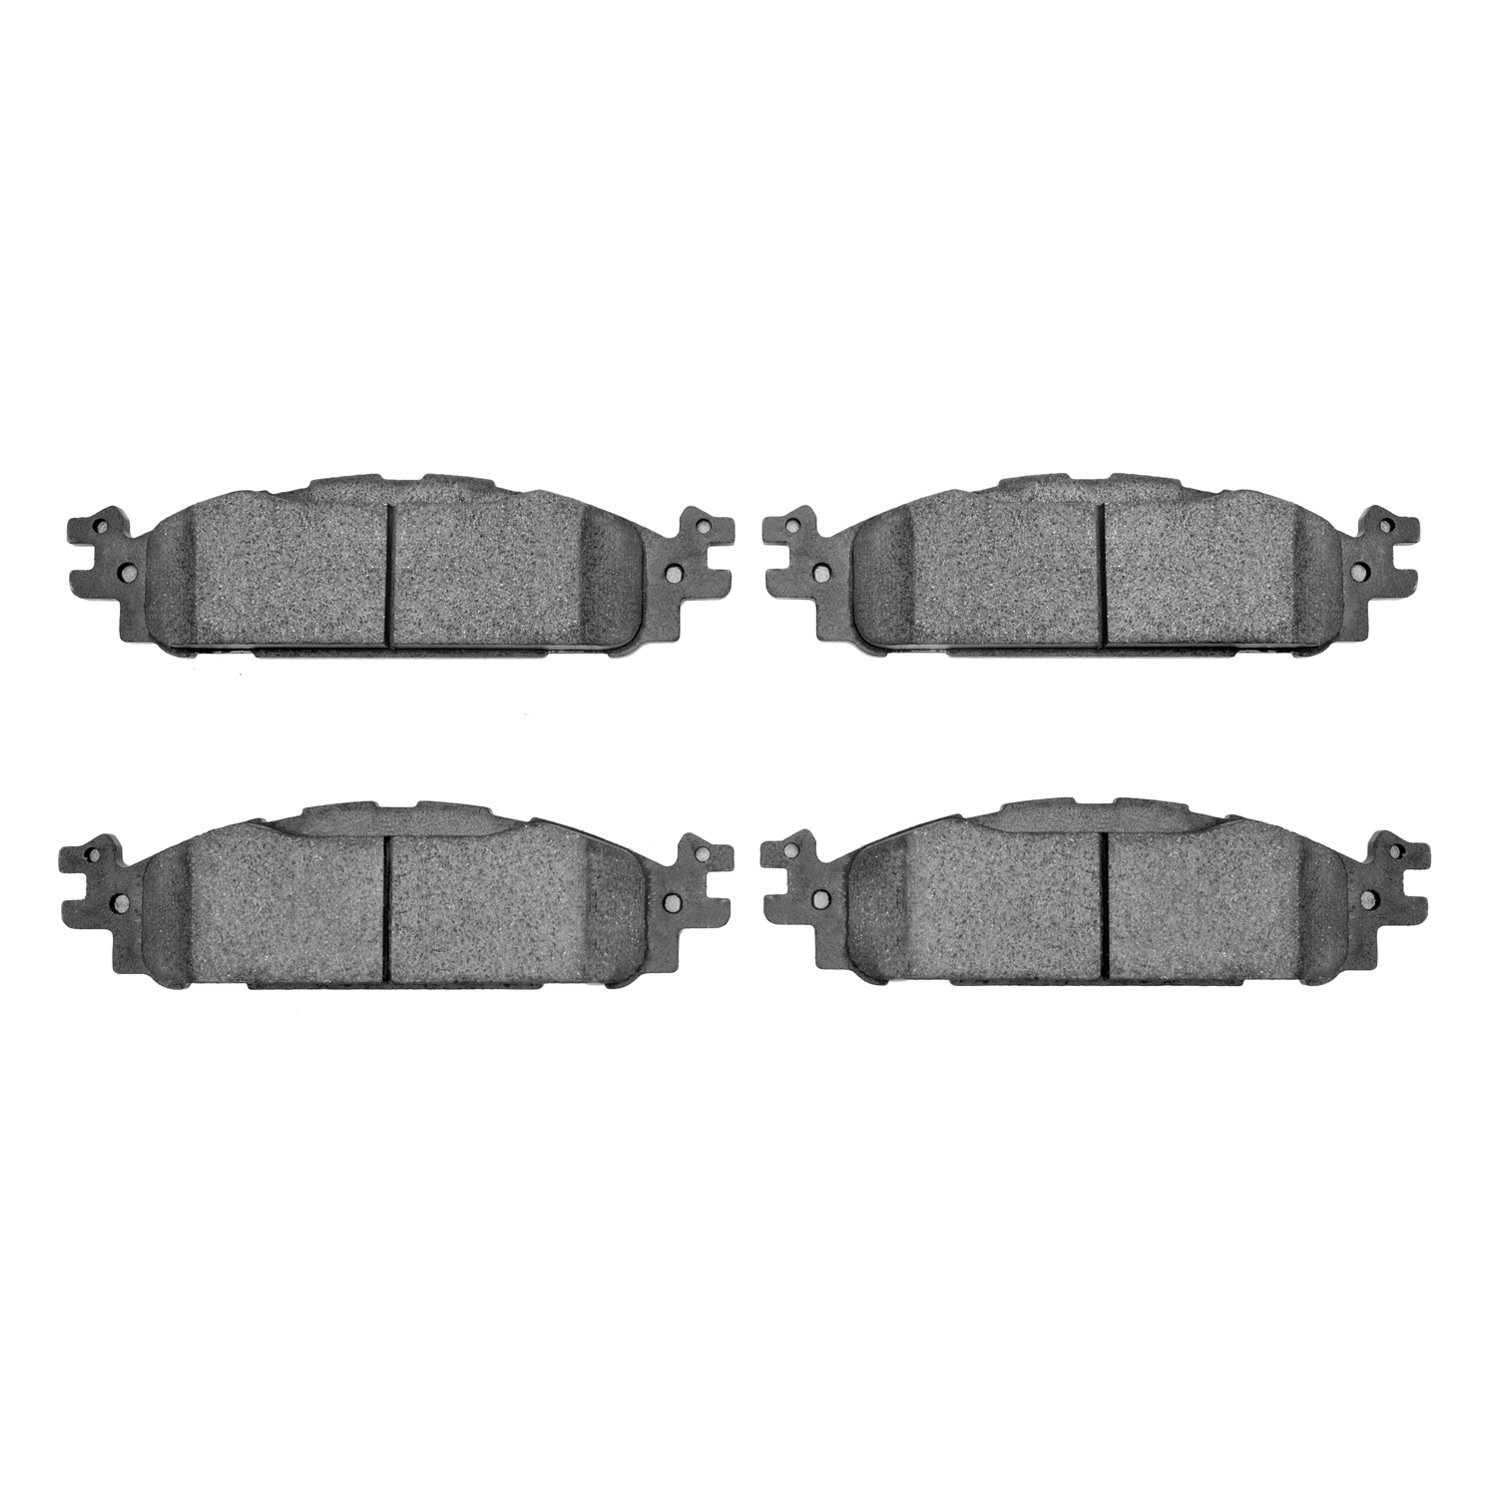 Super-Duty Brake Pads, 2009-2019 Ford/Lincoln/Mercury/Mazda, Position: Front